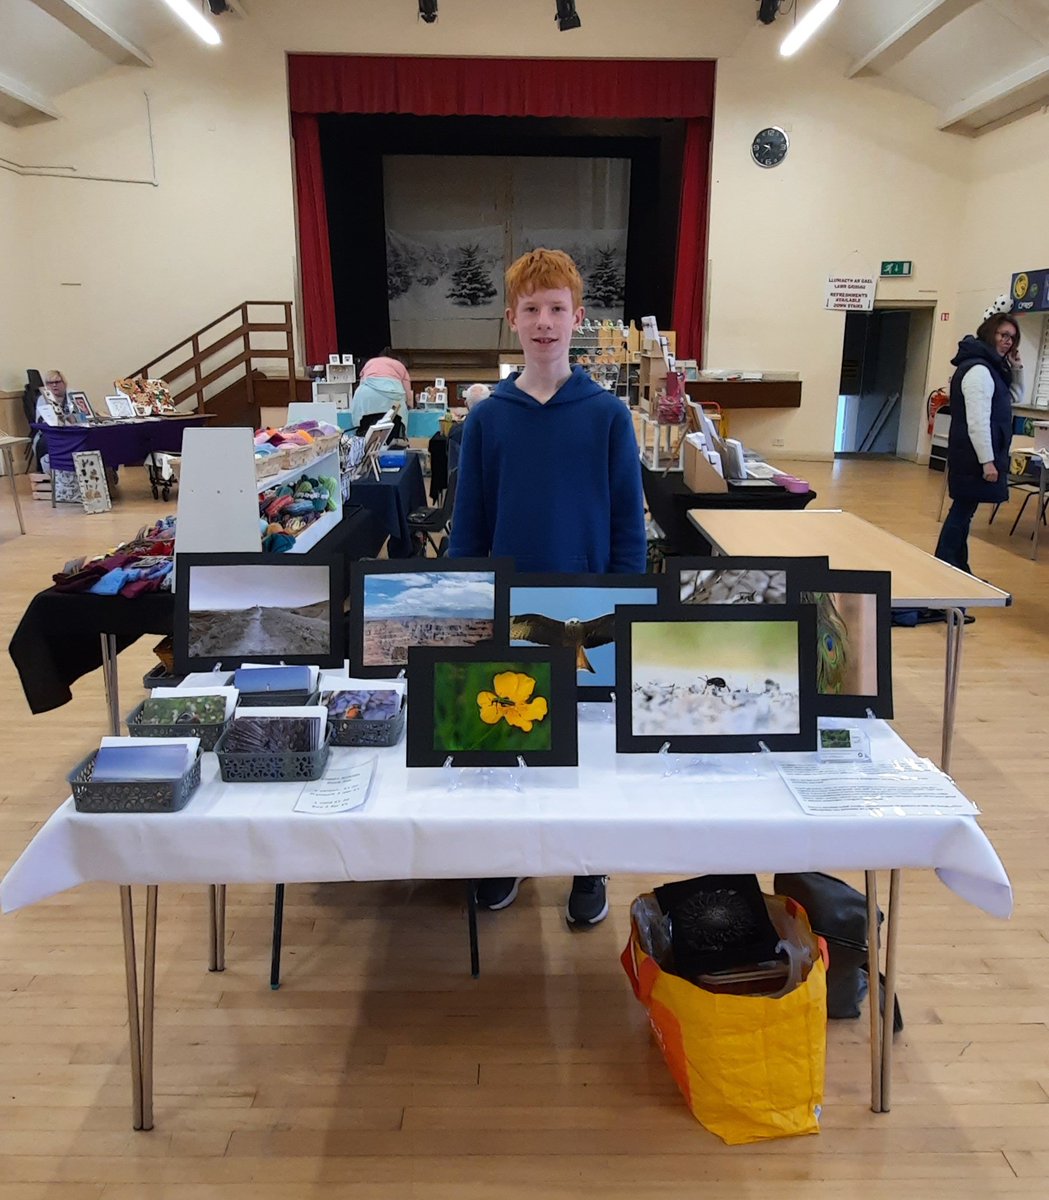 At another fair today with my photos #youngphotographer